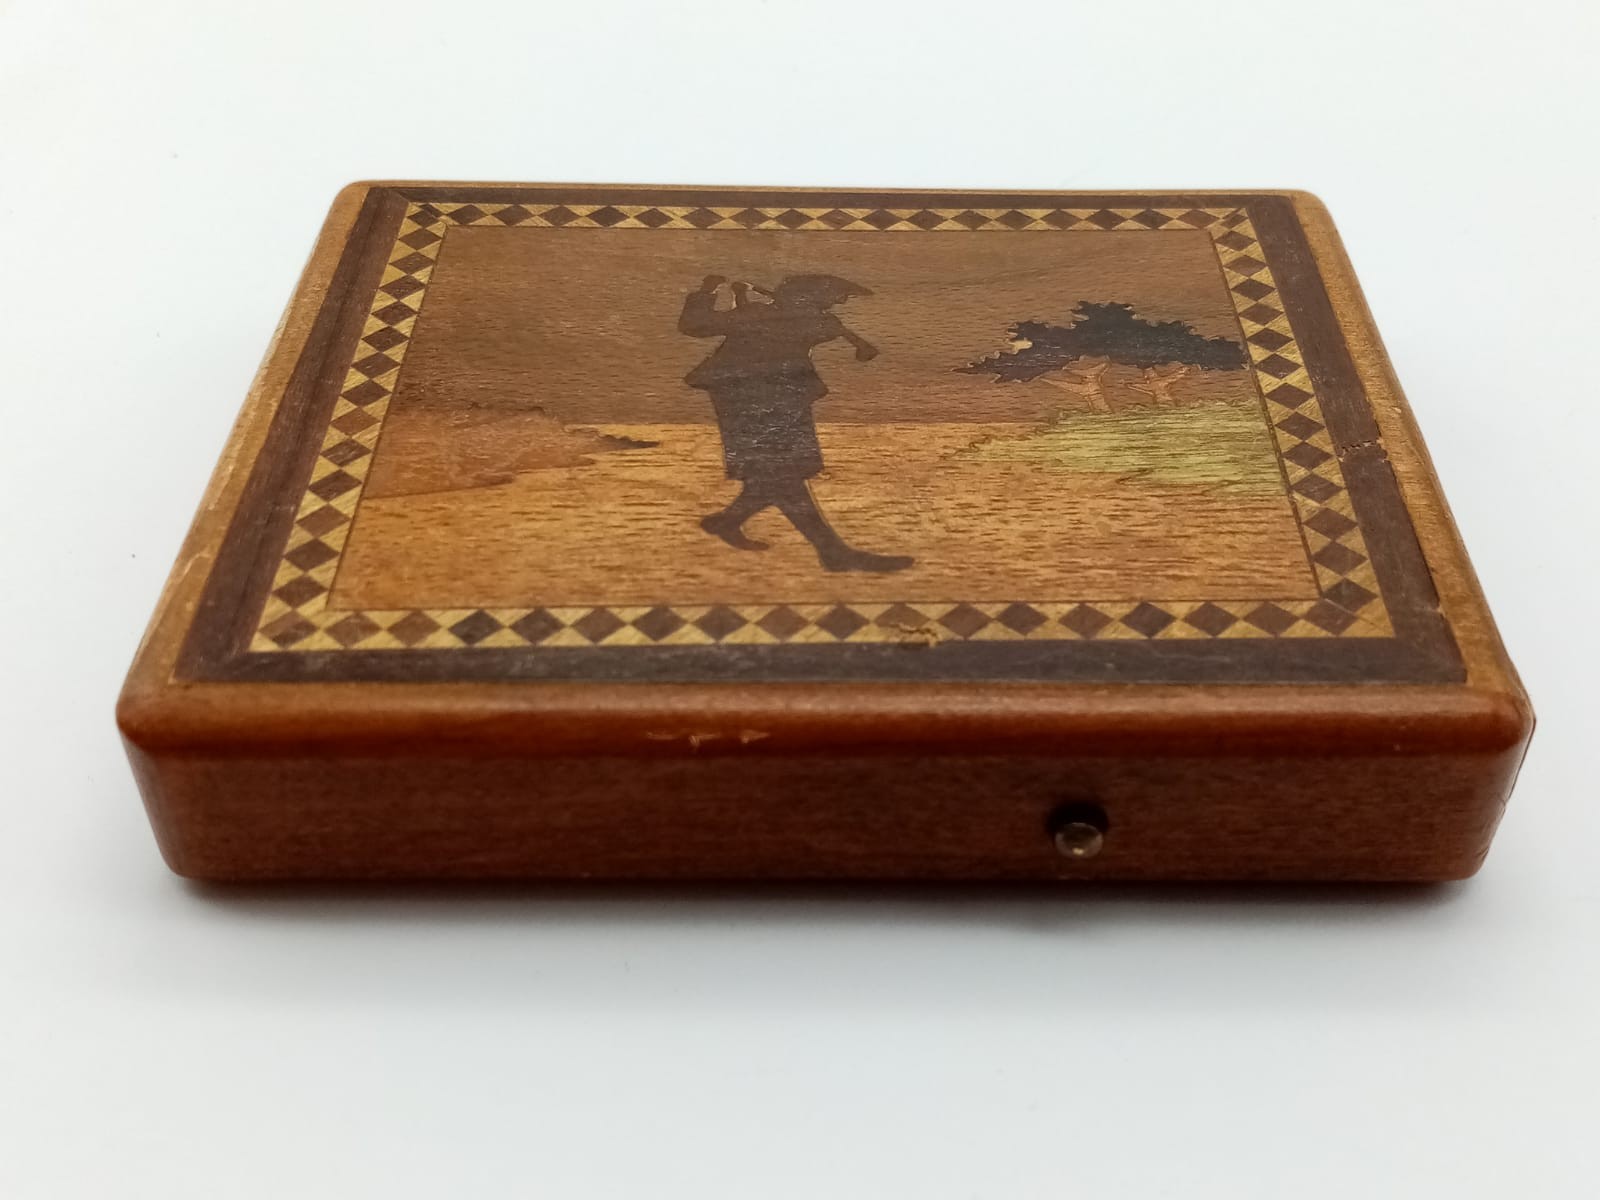 A Charming Vintage Wooden Golfers Cigarette Case. Button Activation works perfectly. 9 x7cm - Image 5 of 5